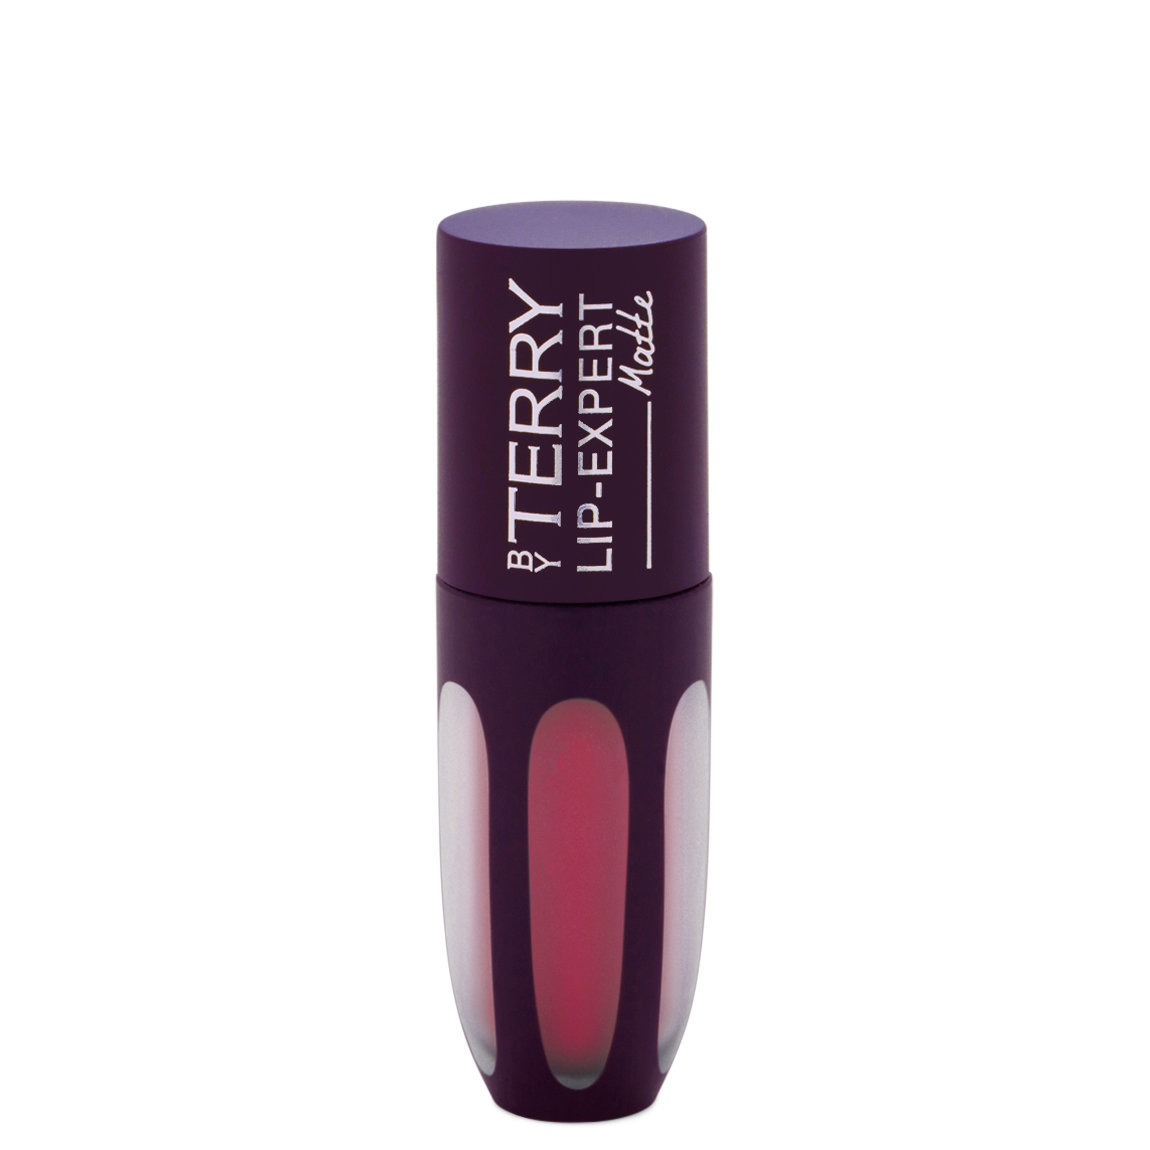 BY TERRY Lip-Expert Matte Chili Fig alternative view 1.